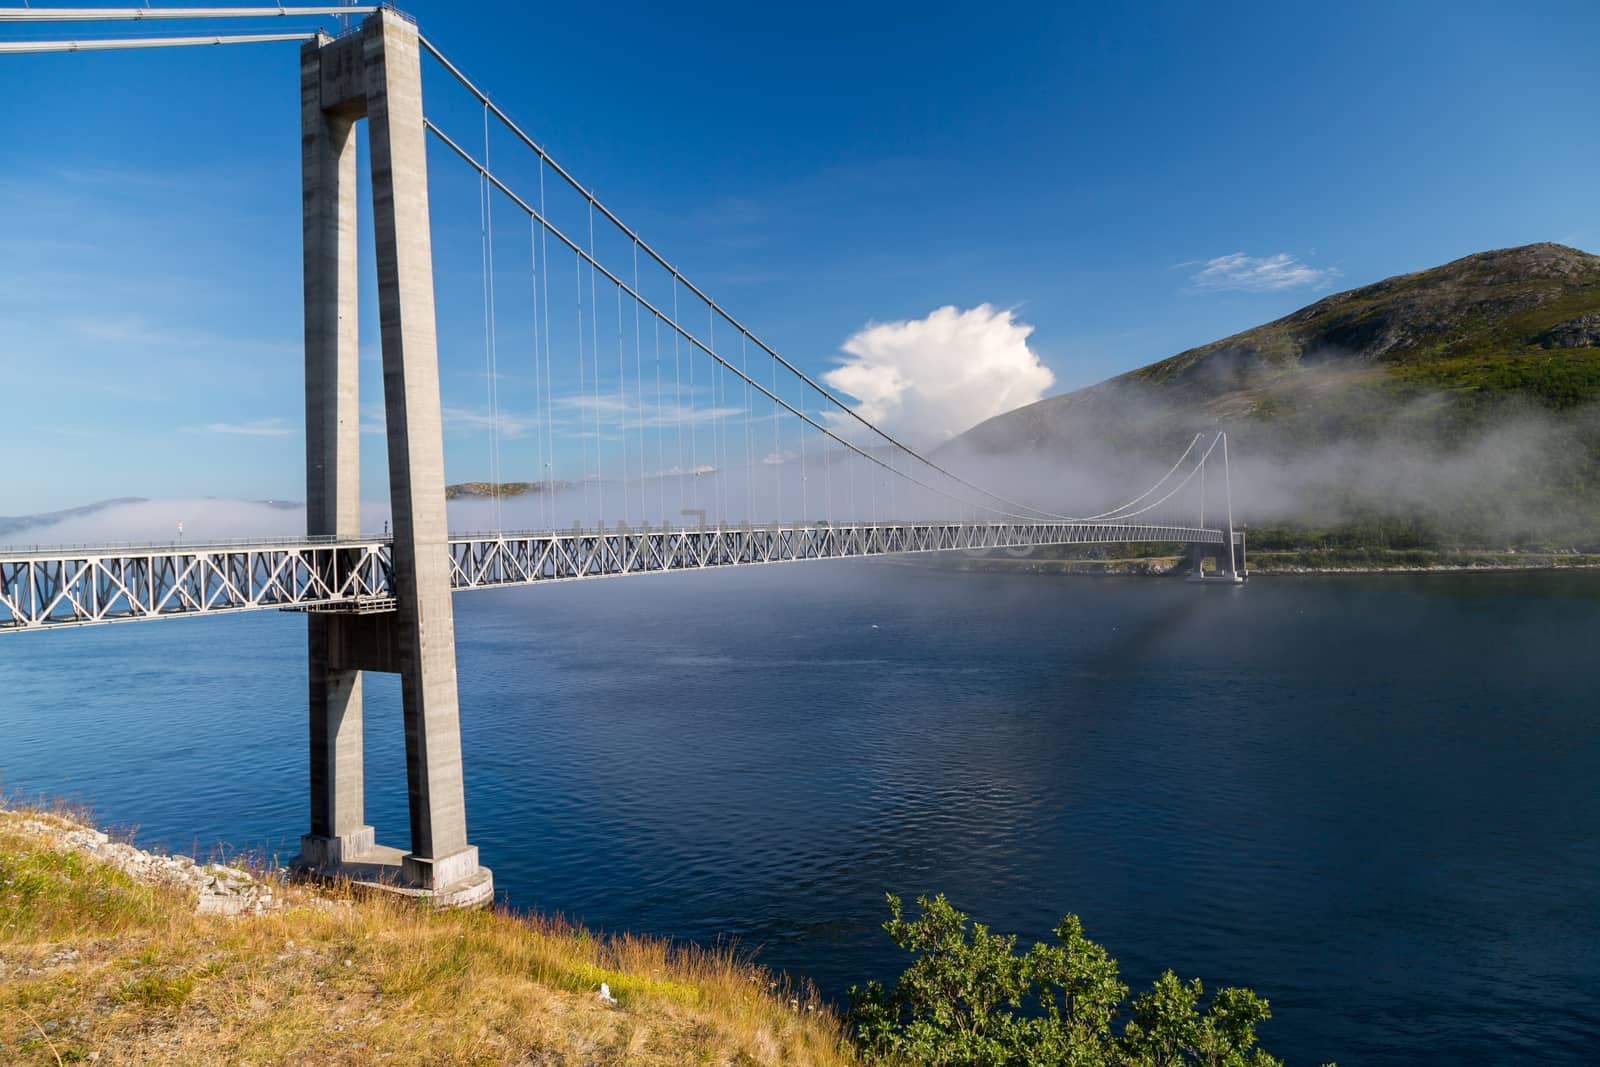 A picture of a hanging bridge in kvalsund, norway